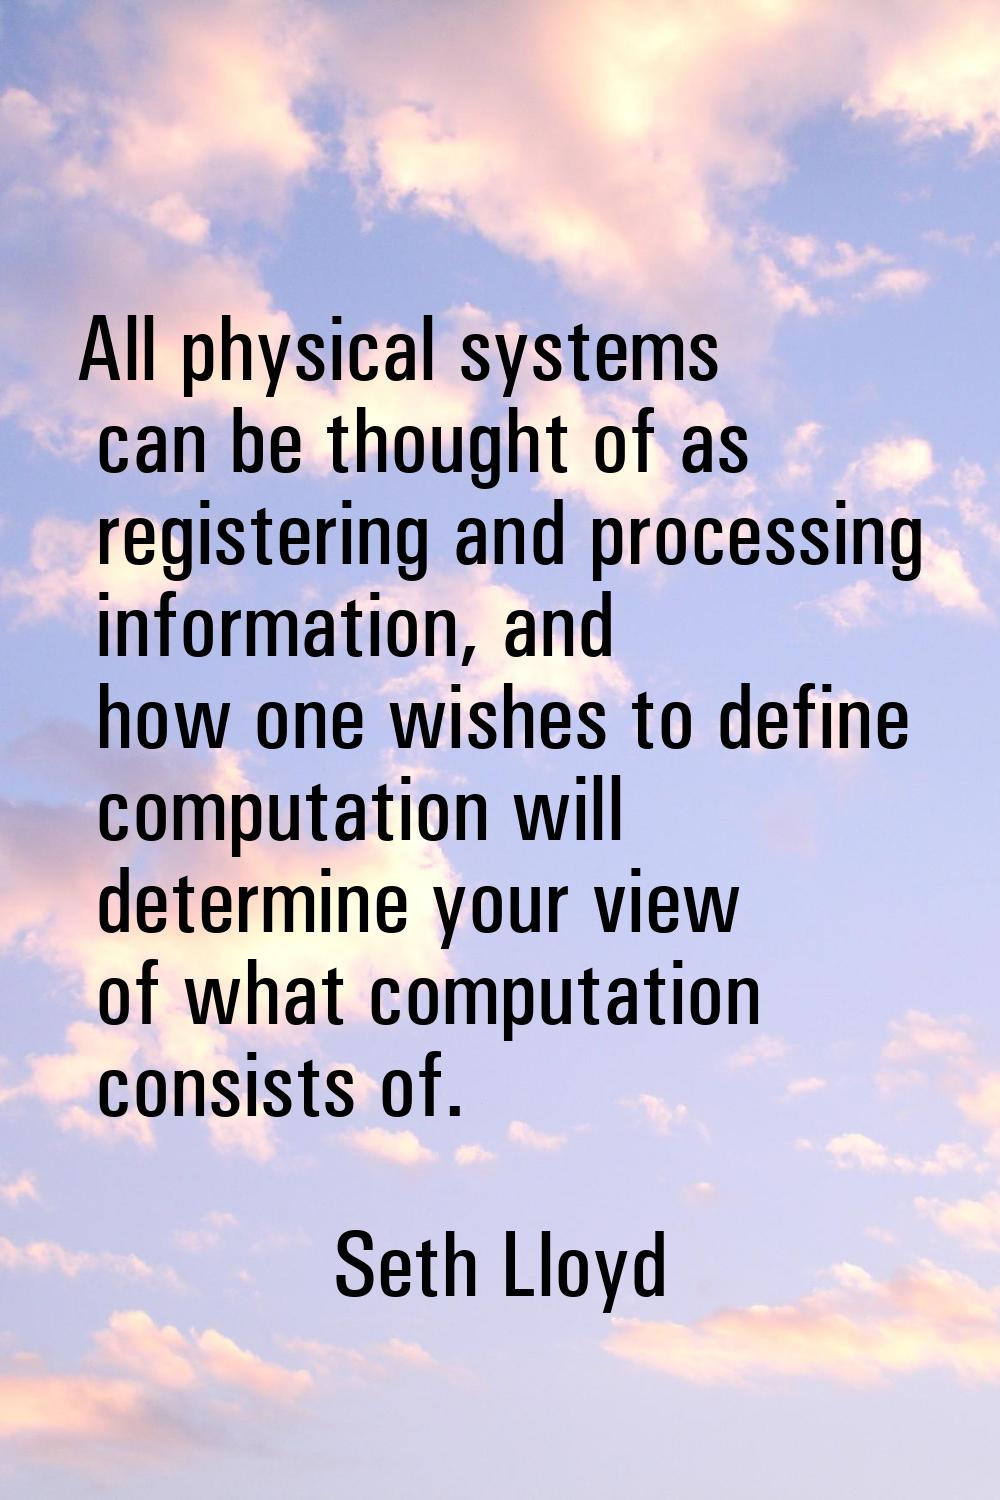 All physical systems can be thought of as registering and processing information, and how one wishe